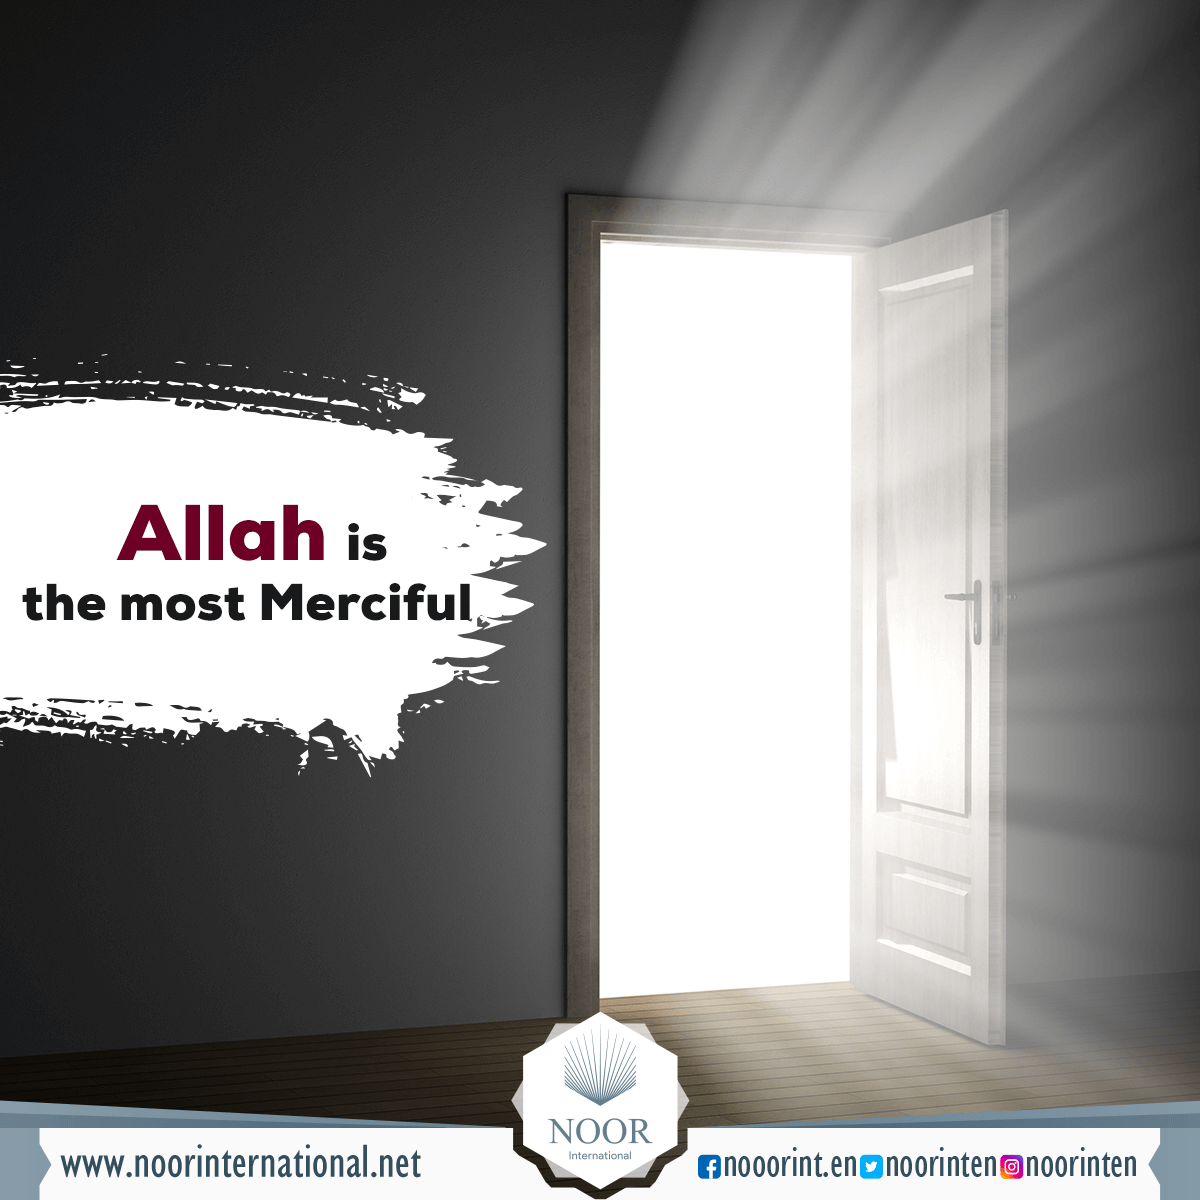 Allah is the most Merciful